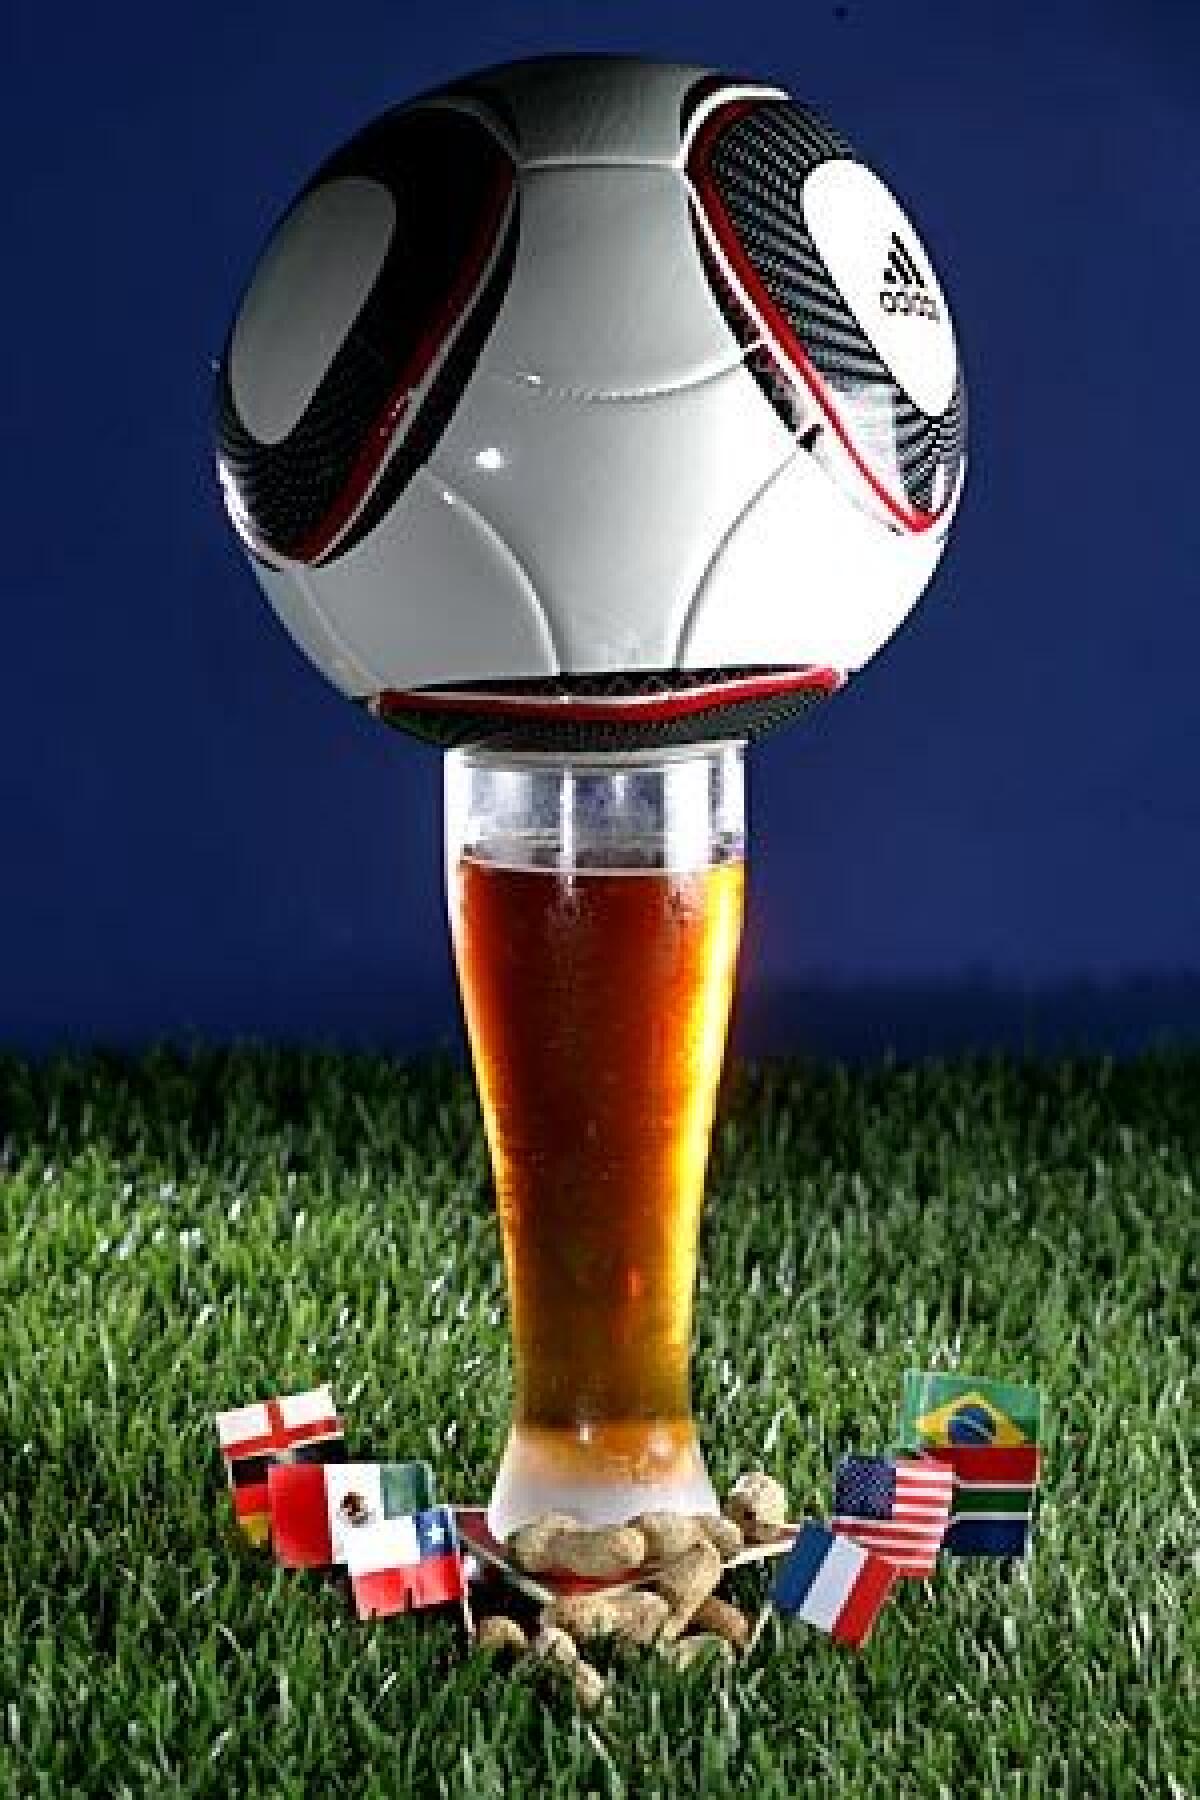 For the World Cup, restaurants in and around Los Angeles will be serving up international party food and drinks.